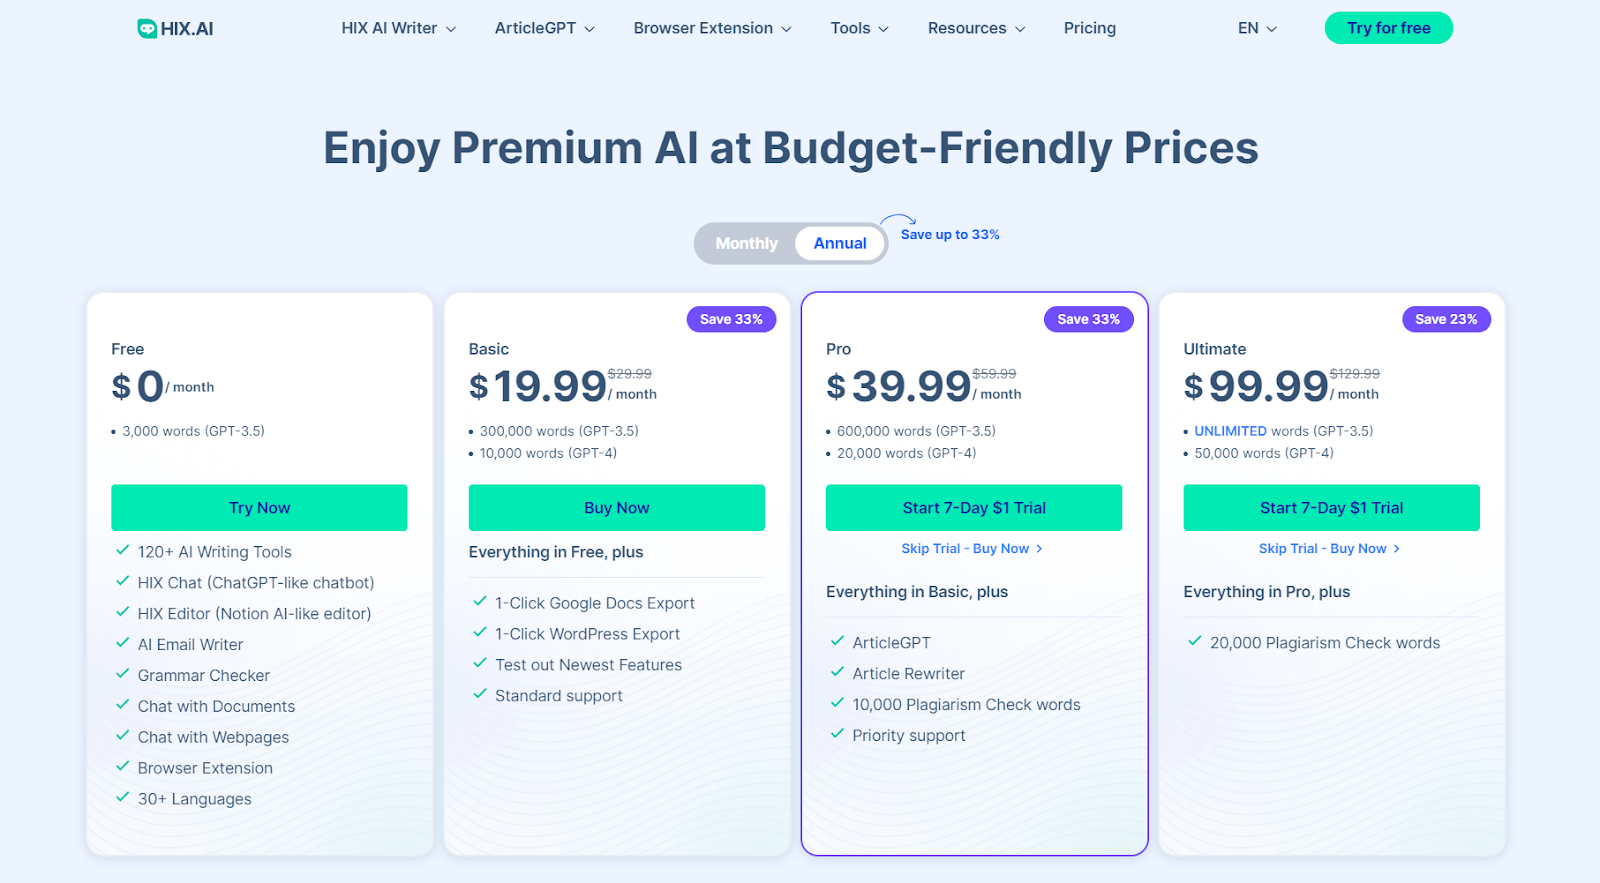 the pricing of hix ai